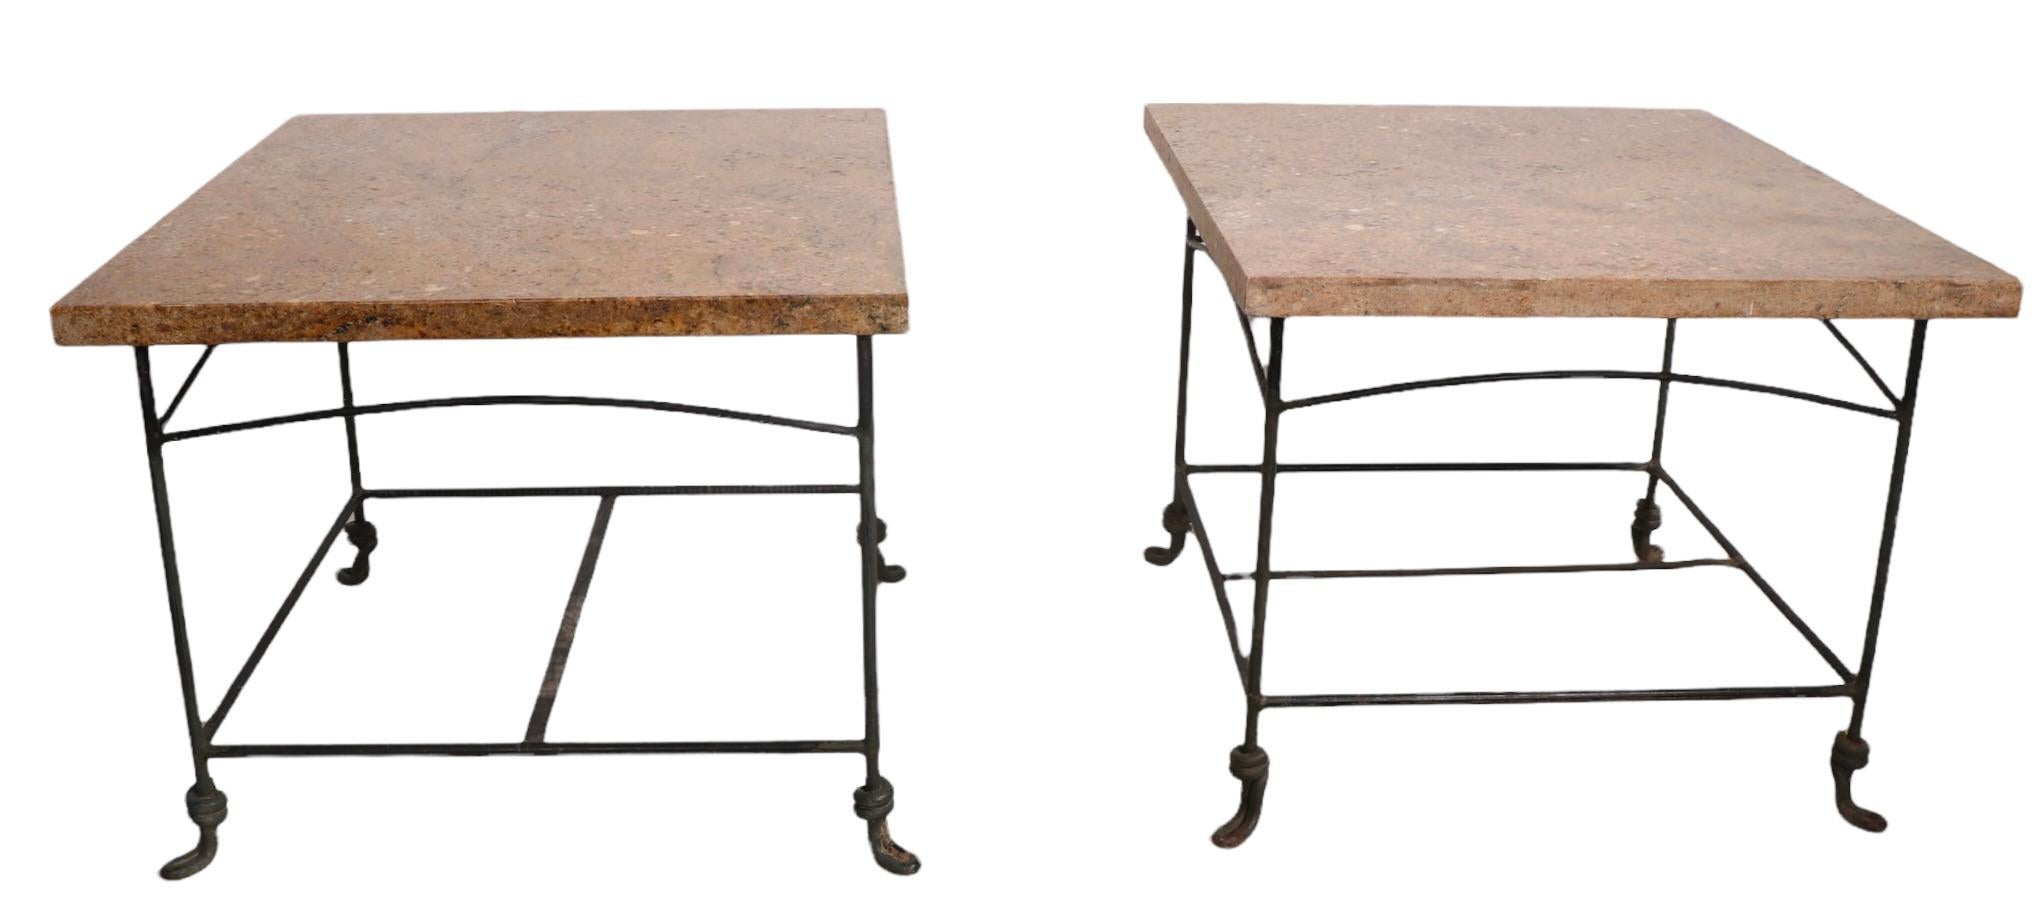 Pr. Wrought Iron Garden Patio End Tables with Polished Granite Tops 3